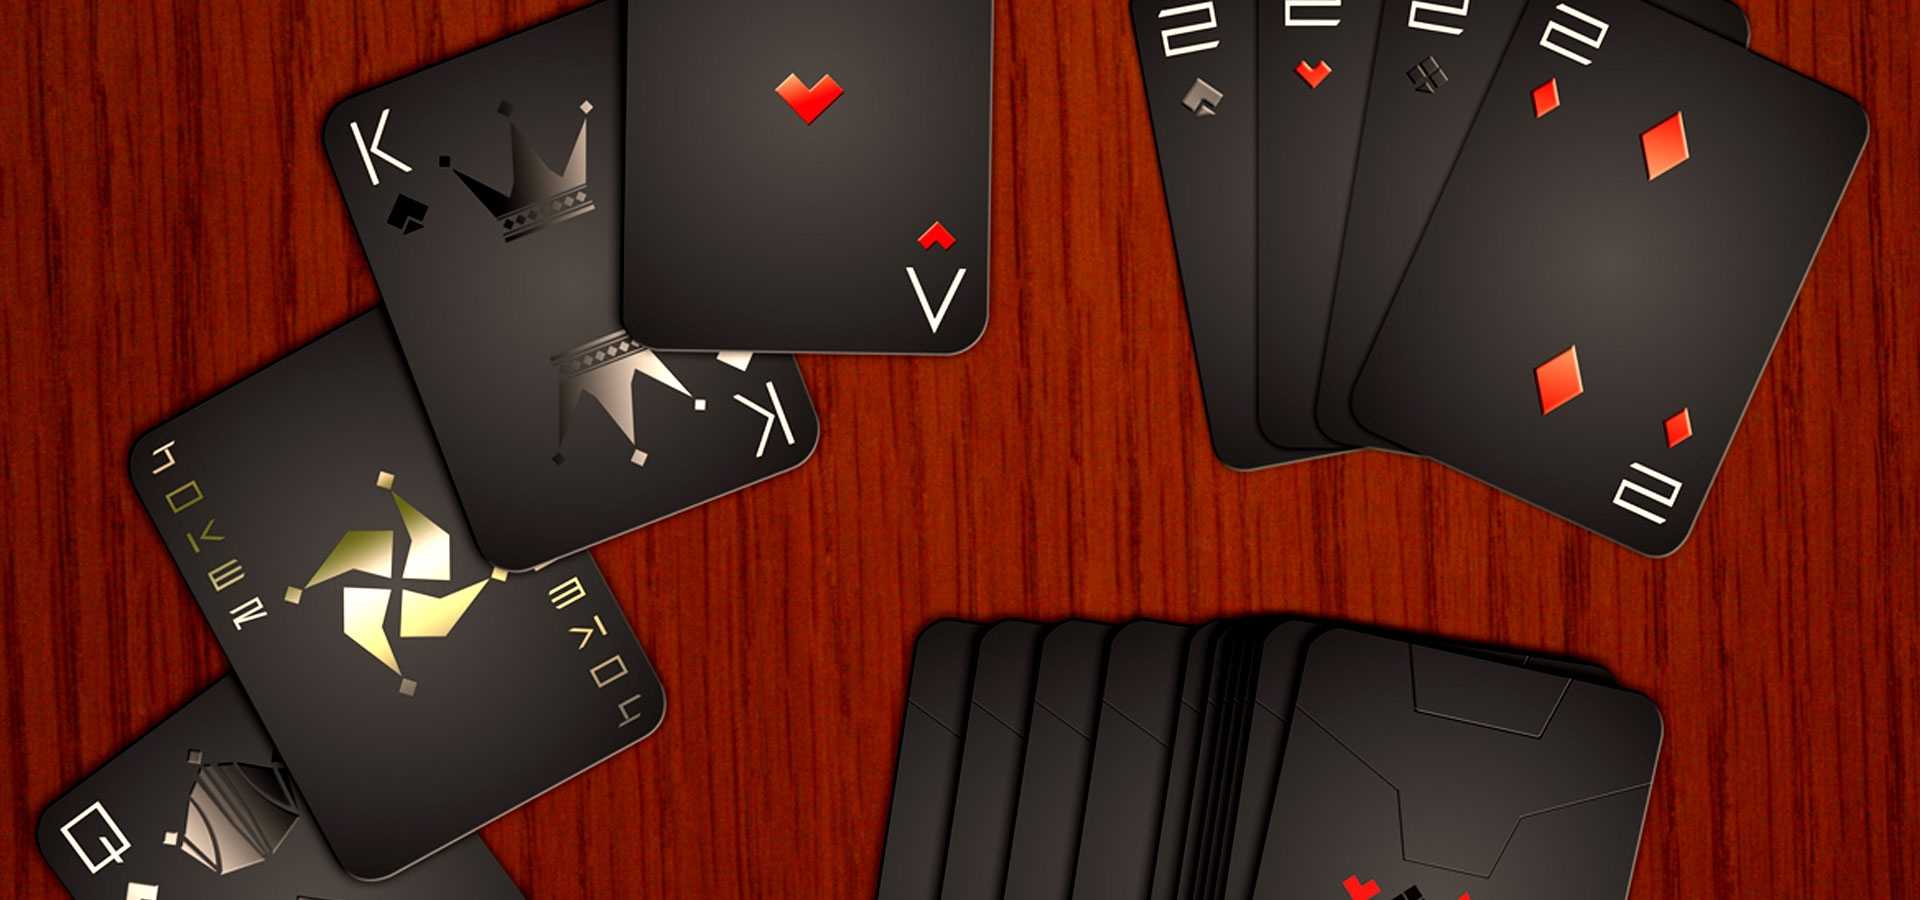 22+ Playing Card Designs | Free & Premium Templates Intended For Deck Of Cards Template